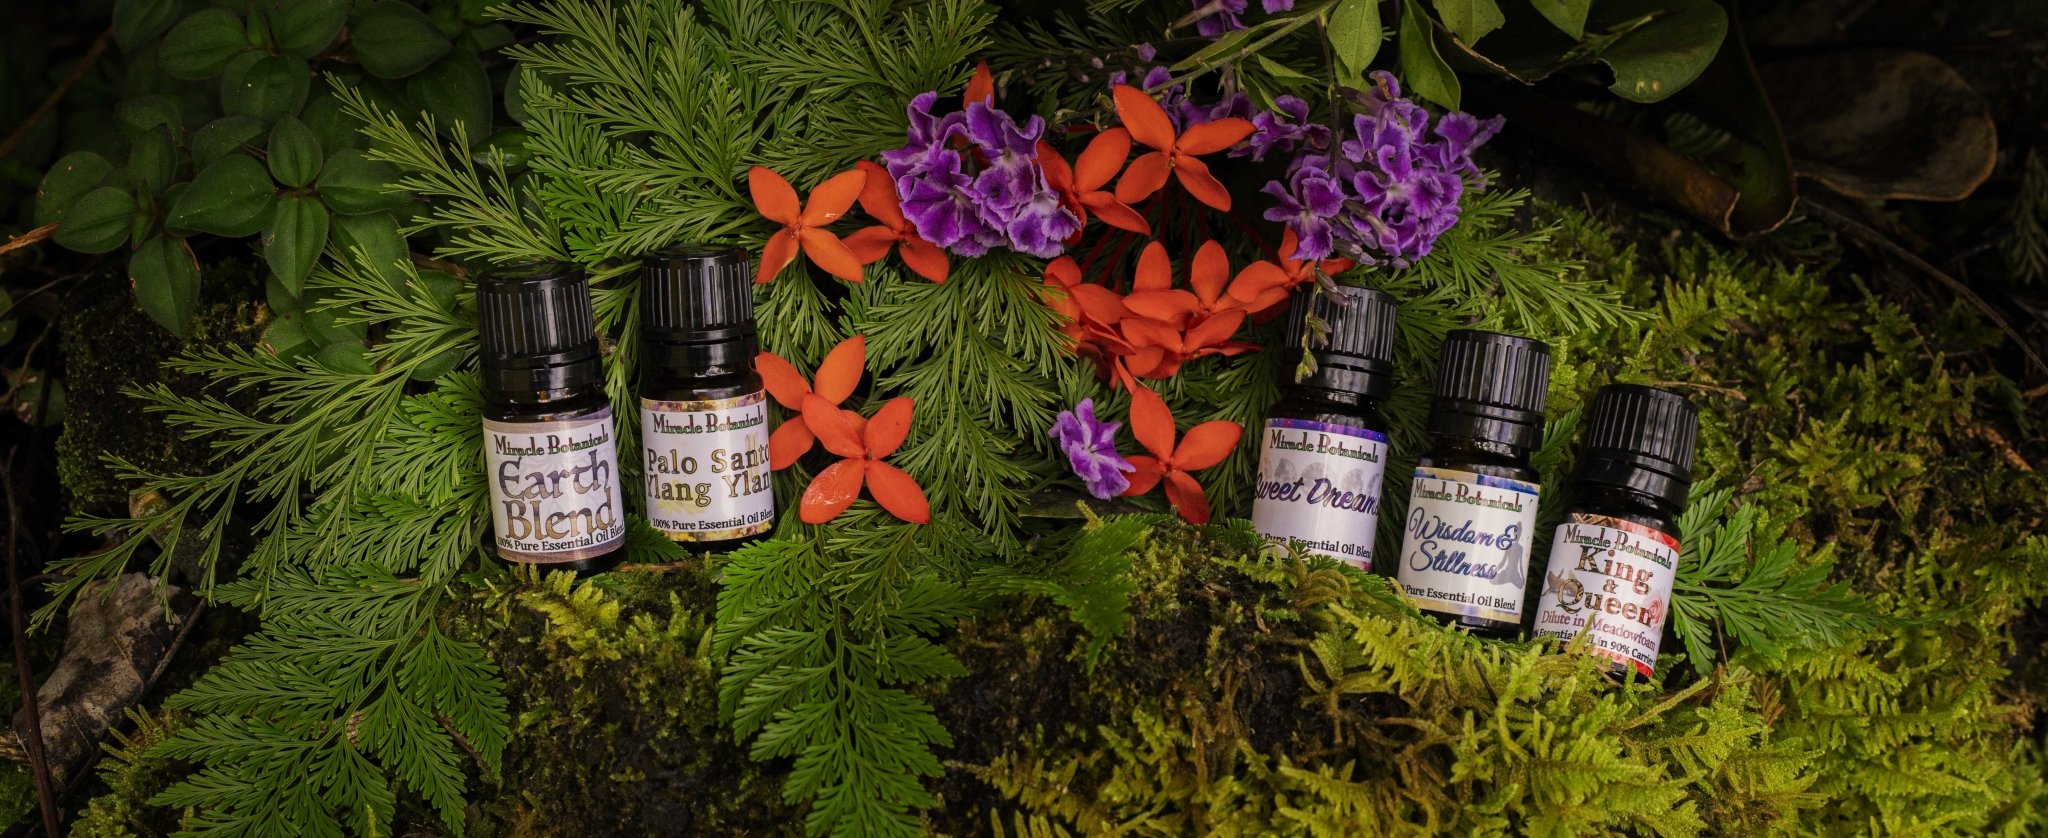 All Blends - Miracle Botanicals Essential Oils